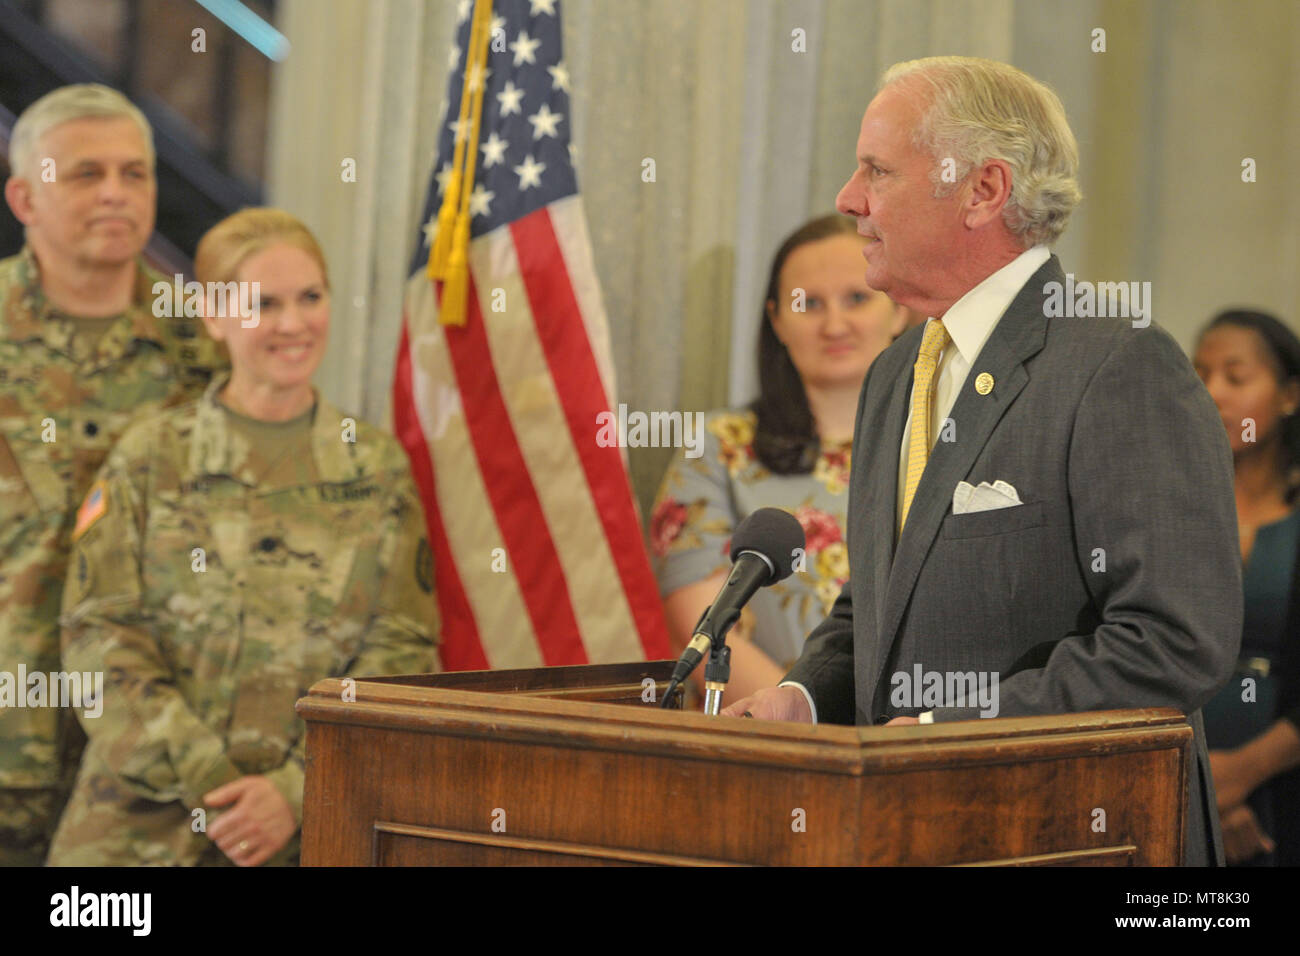 South Carolina Gov. Henry McMaster presents a Proclamation recognizing May as Military Spouse Appreciation month throughout South Carolina, joined by U.S. Army Maj. Gen. Robert E. Livingston, Jr. the adjutant general for South Carolina and his wife Barbara, Fort Jackson's Military Family of the Year, Staff Sgt. John Berta and his wife Agata, U.S. Coast Guard Petty Officer Jerry Stevens and his wife Sarah, and other military members with the spouses from the South Carolina Army and Air National Guard.  Receiving special recognition were four spouses of South Carolina Army National Guard Soldier Stock Photo